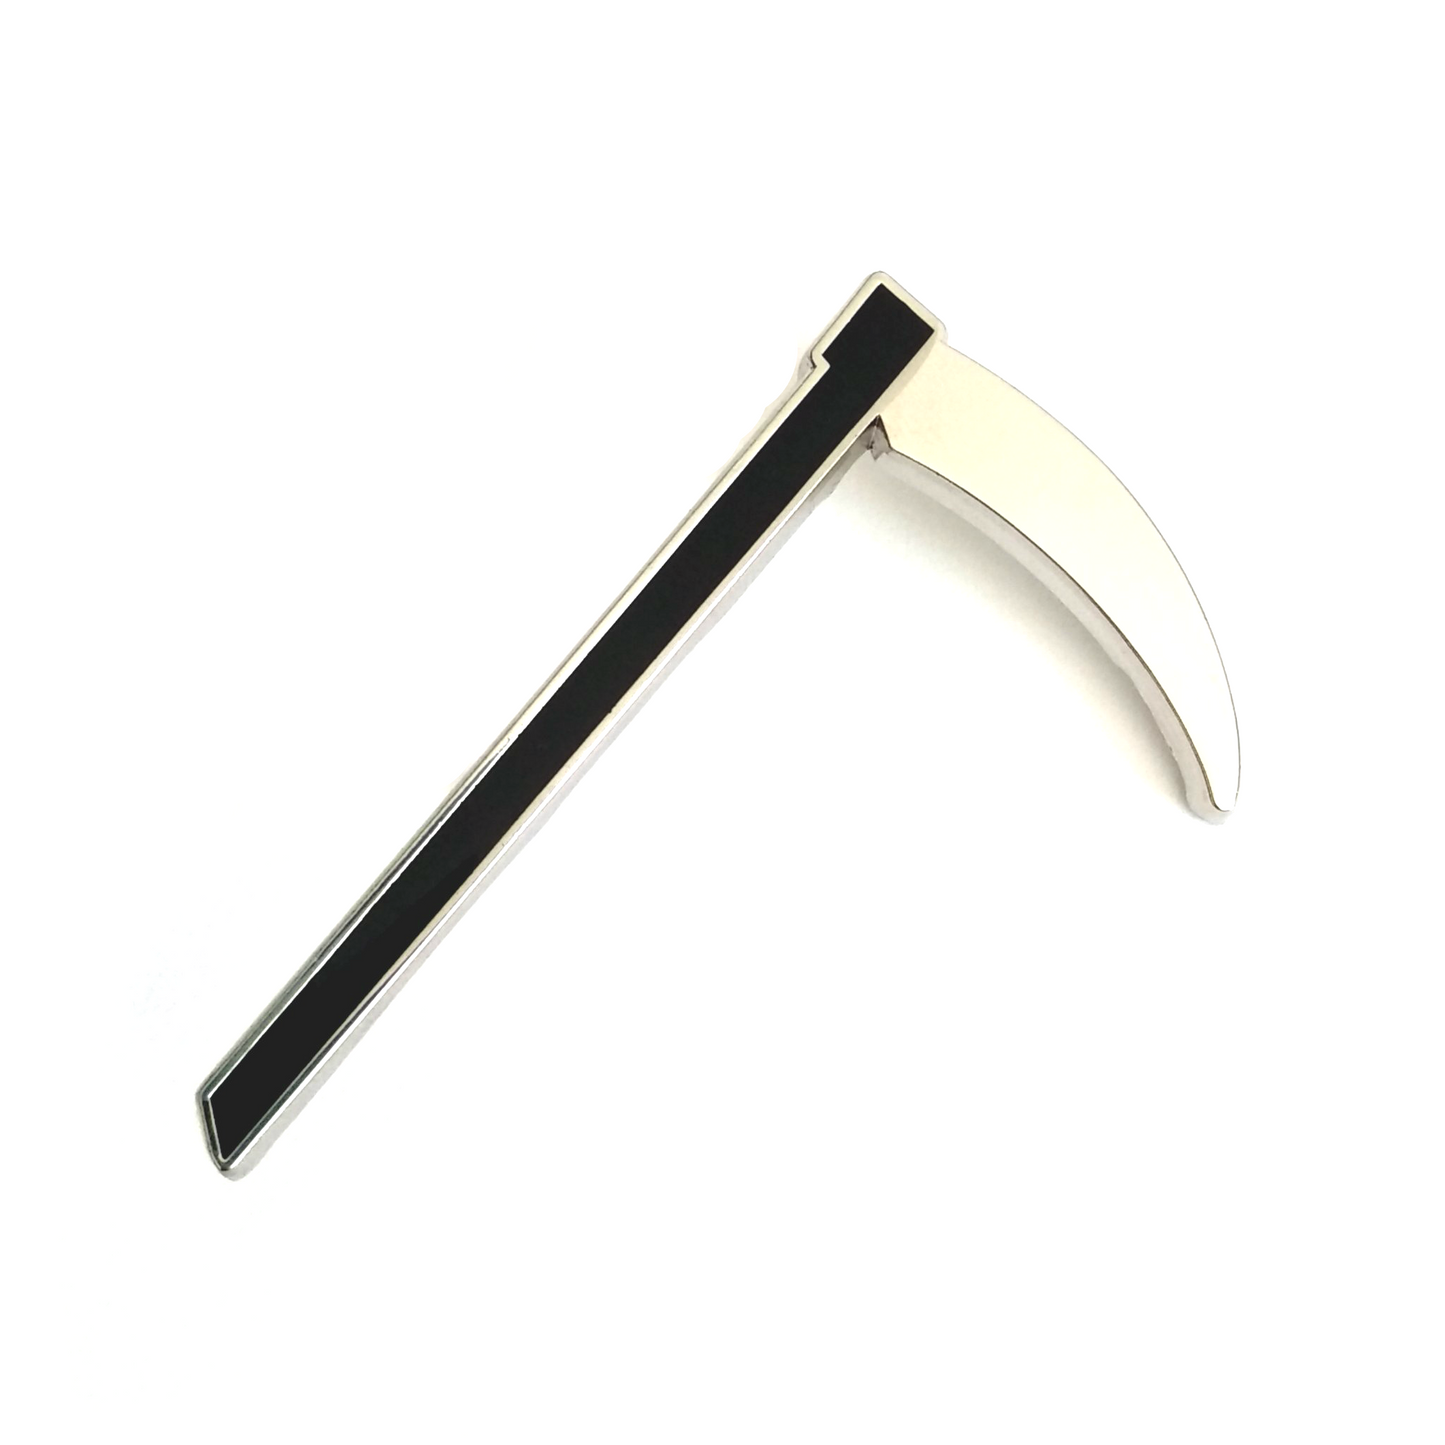 PRE-SALE: REAP JUST WHAT YOU SOW Enamel Scythe Pin